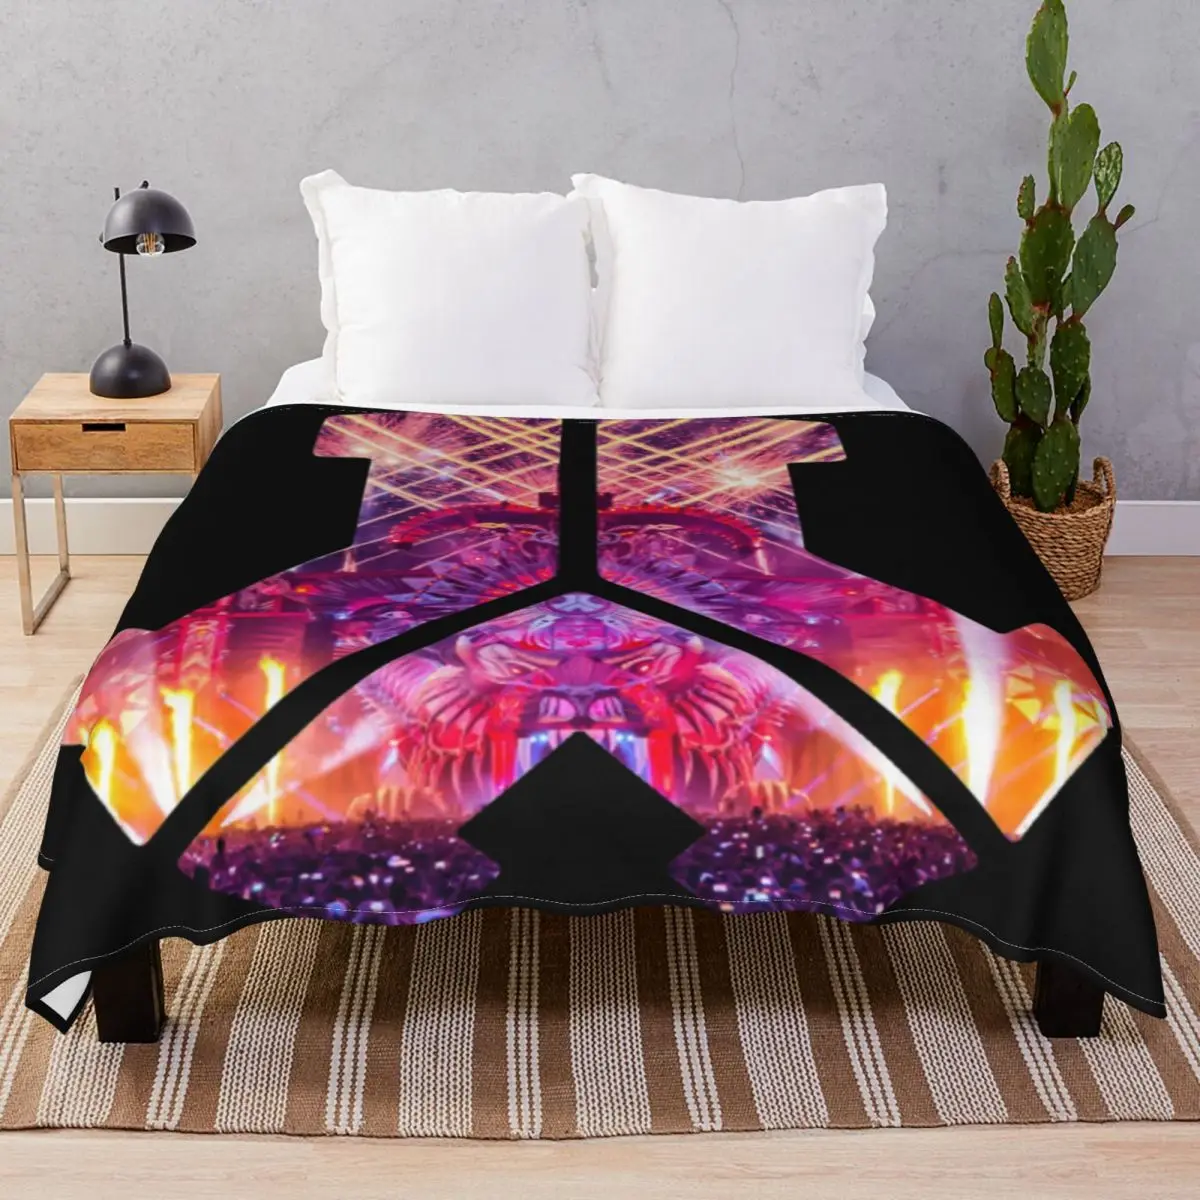 Defqon.1 Logo Mainstage Print Blanket Flannel Plush Decoration Multifunction Throw Blankets for Bedding Home Couch Camp Office